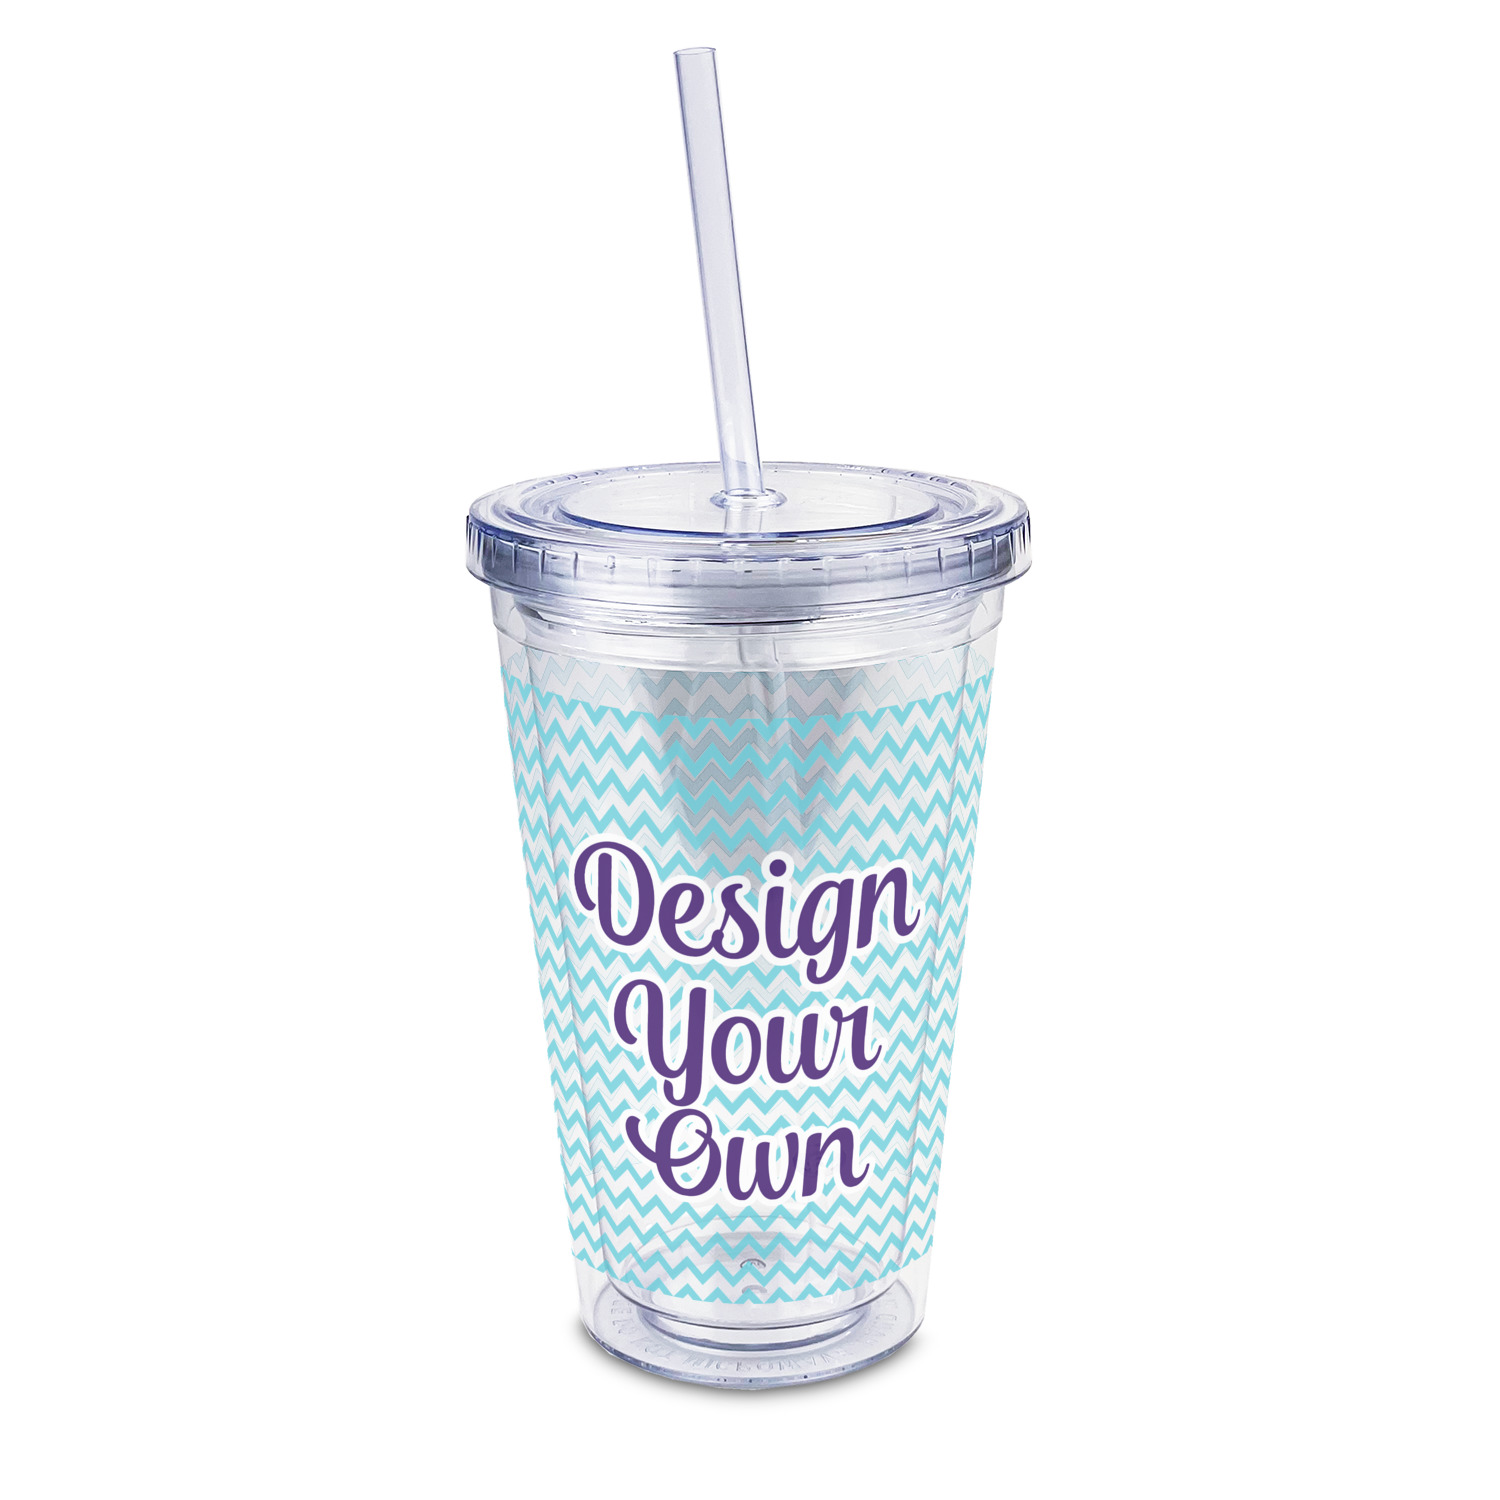 https://www.youcustomizeit.com/common/MAKE/965833/Design-Your-Own-Acrylic-Tumbler-Full-Print-Front-Main.jpg?lm=1666052094